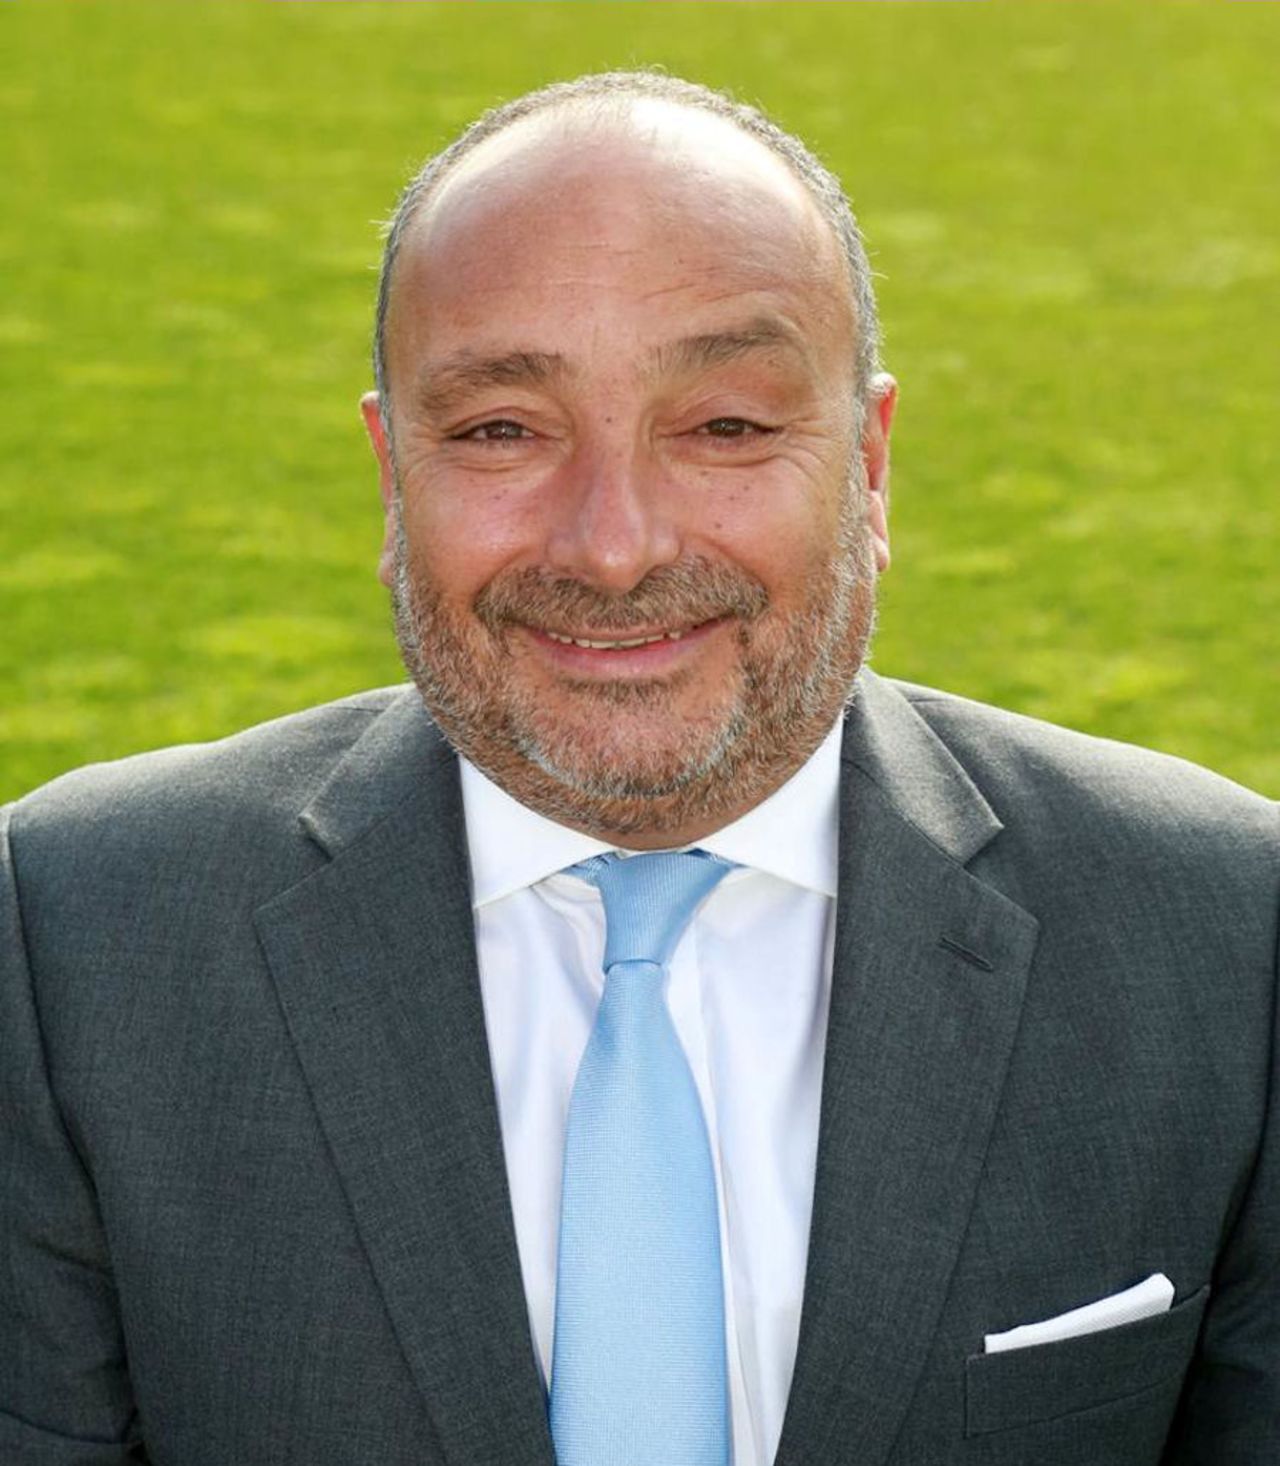 Zak Toumazi, Sussex chief executive, is leaving the county